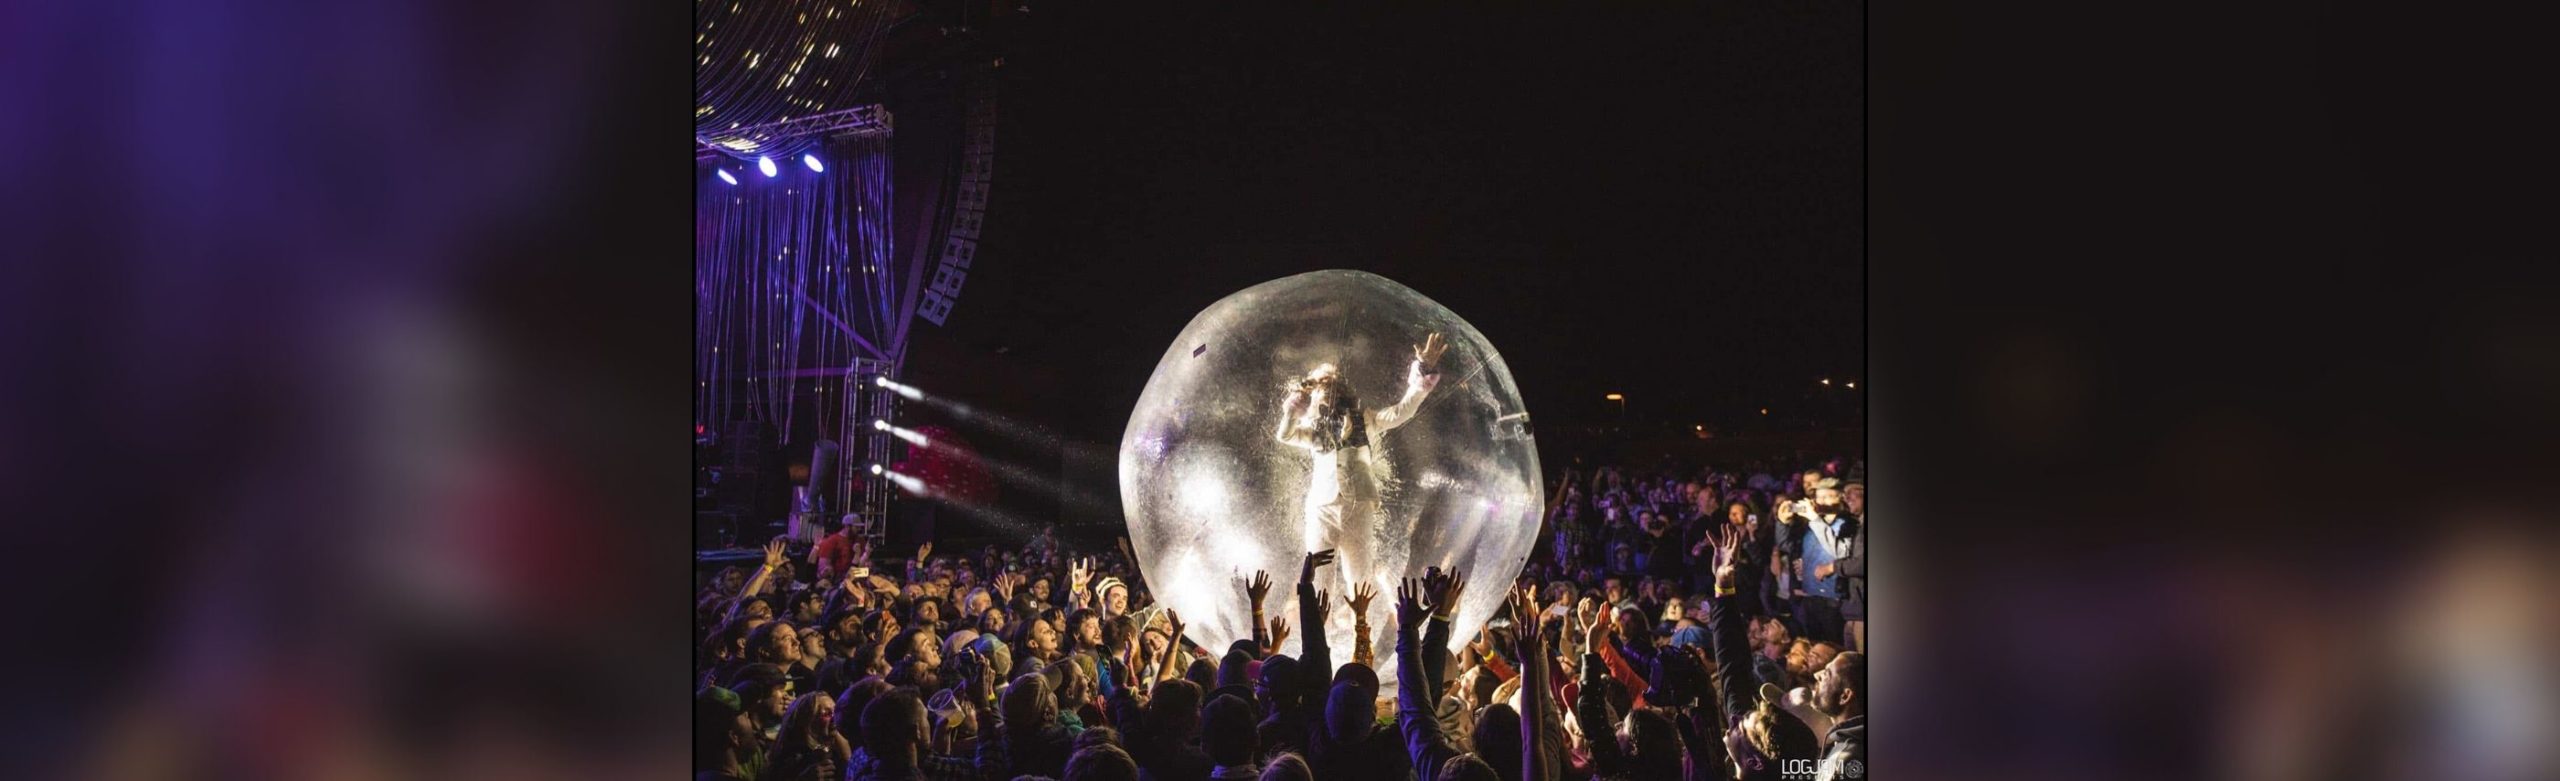 The Flaming Lips Reschedule Highly Anticipated Missoula Show to 2021 Image